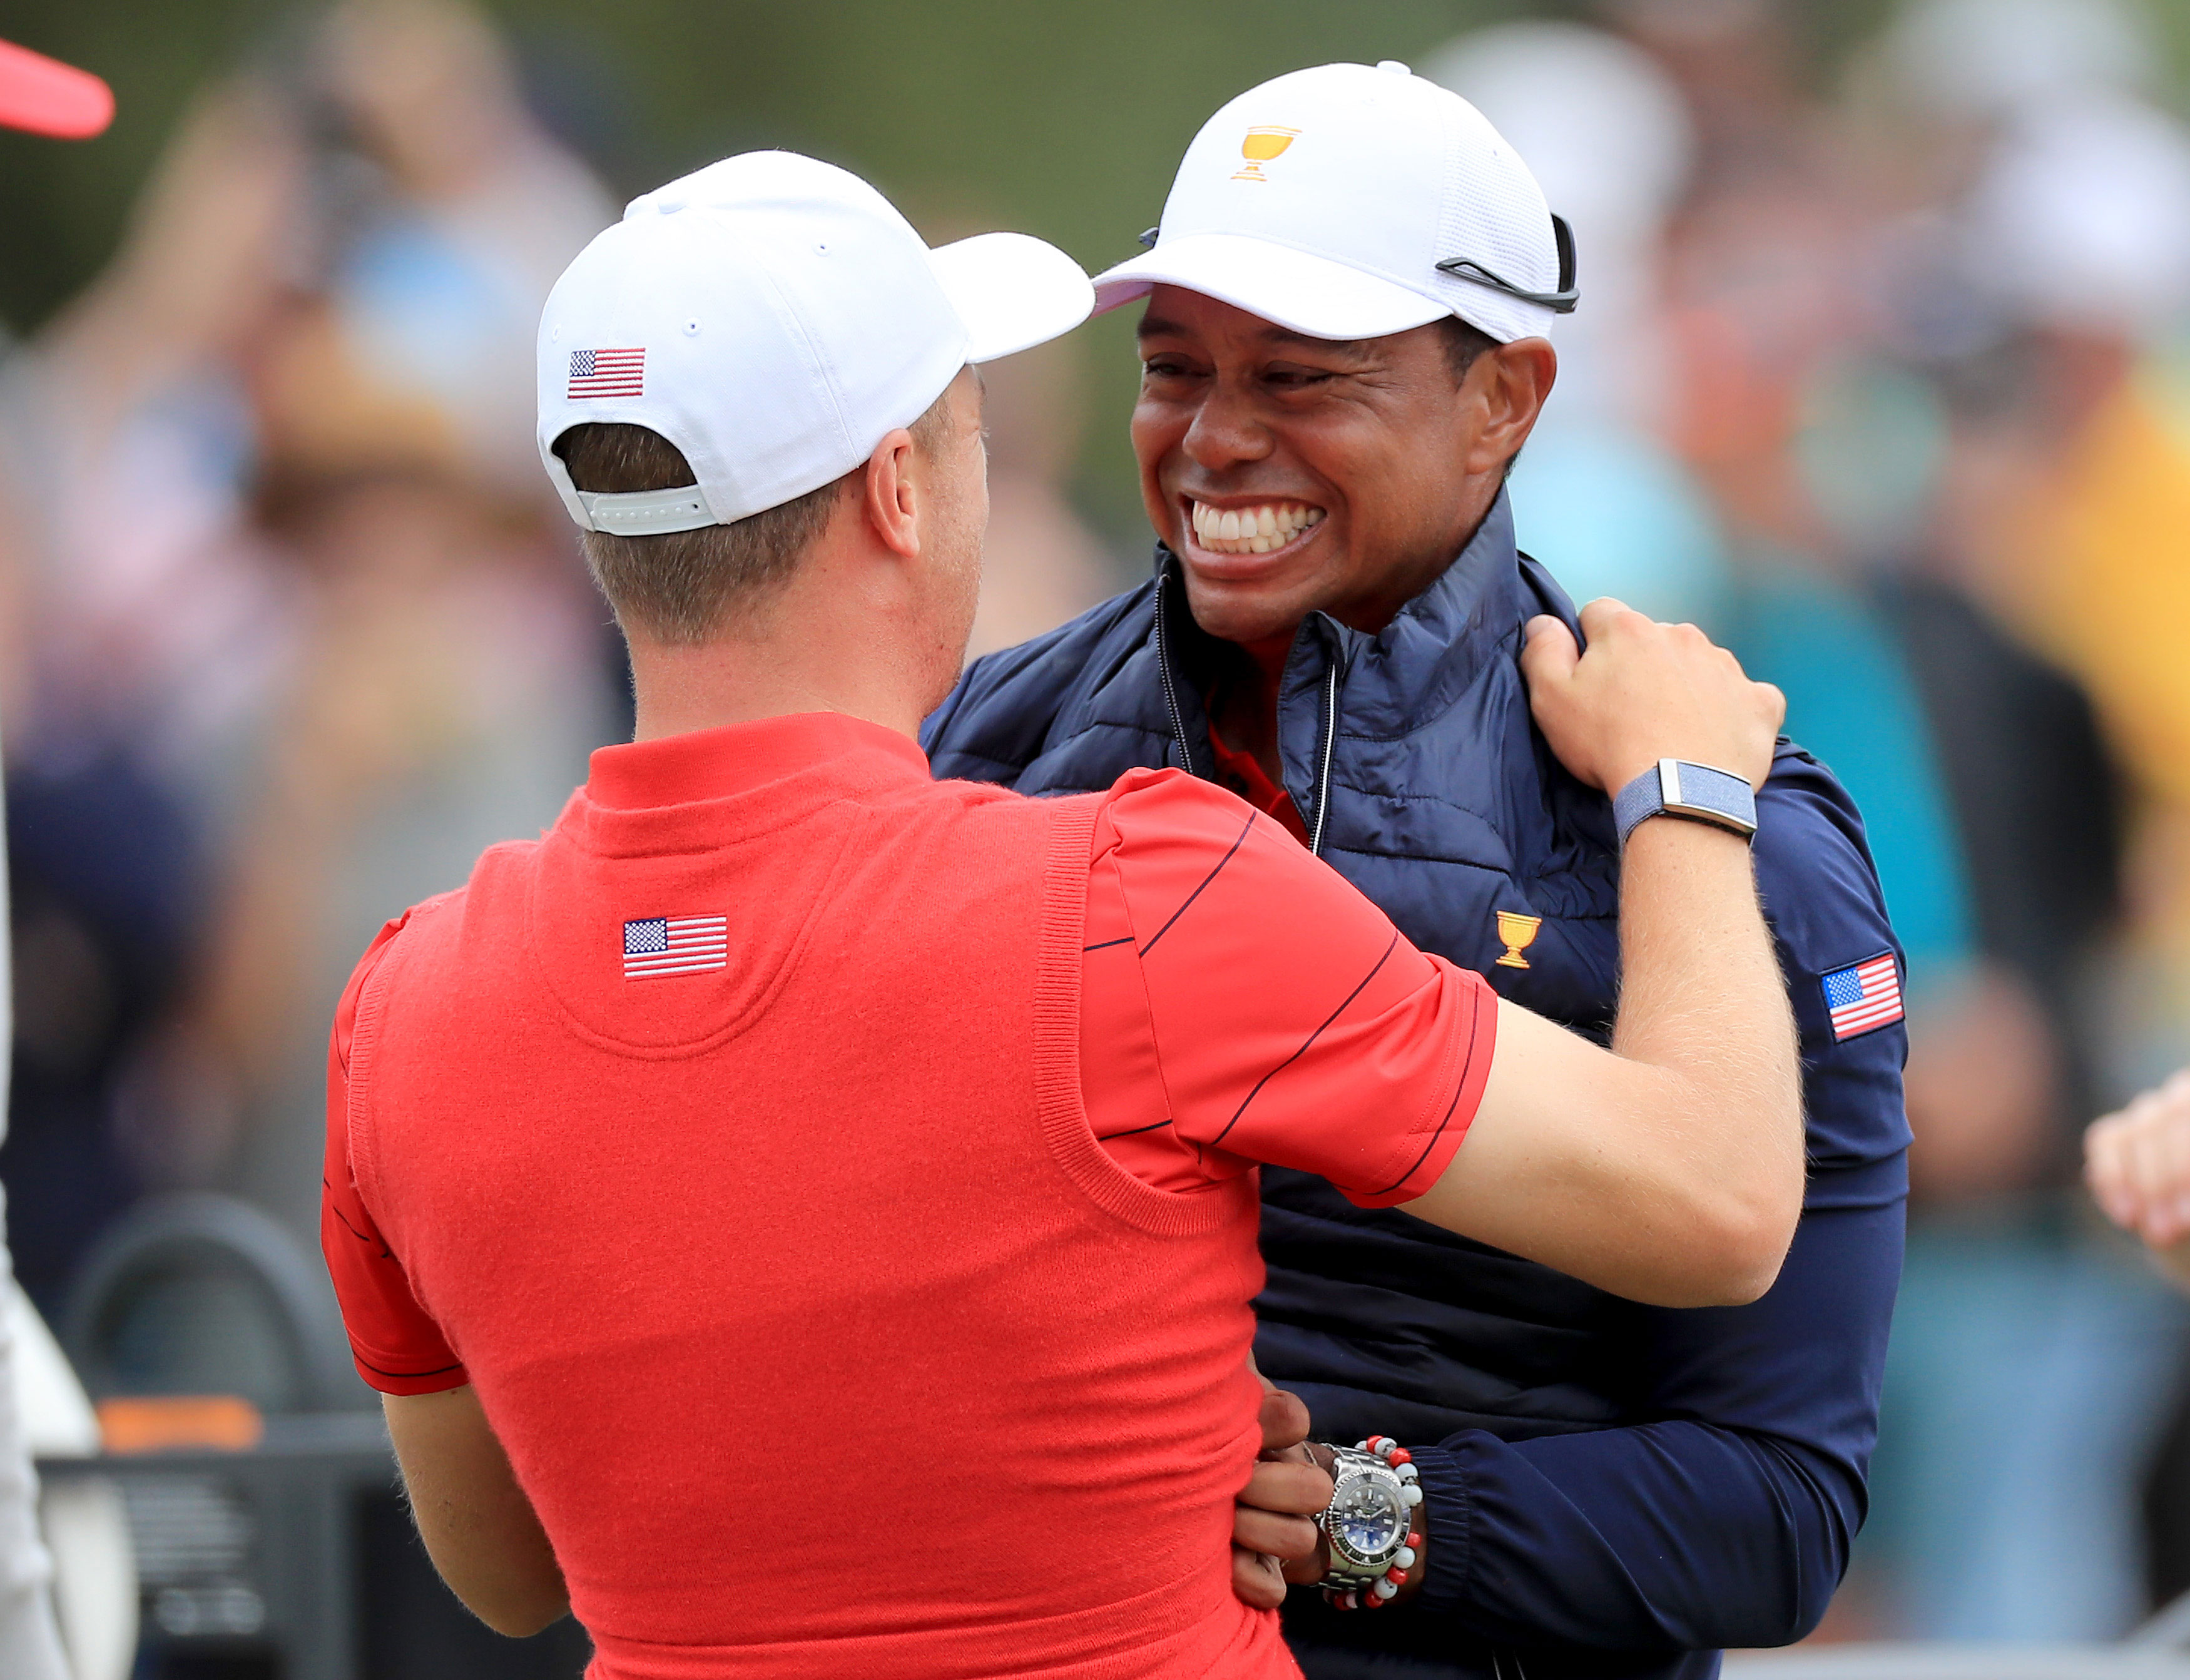 Presidents Cup 2019 Tiger Woods playing captain journey ends as most Tiger stories do—in victory Golf News and Tour Information Golf Digest